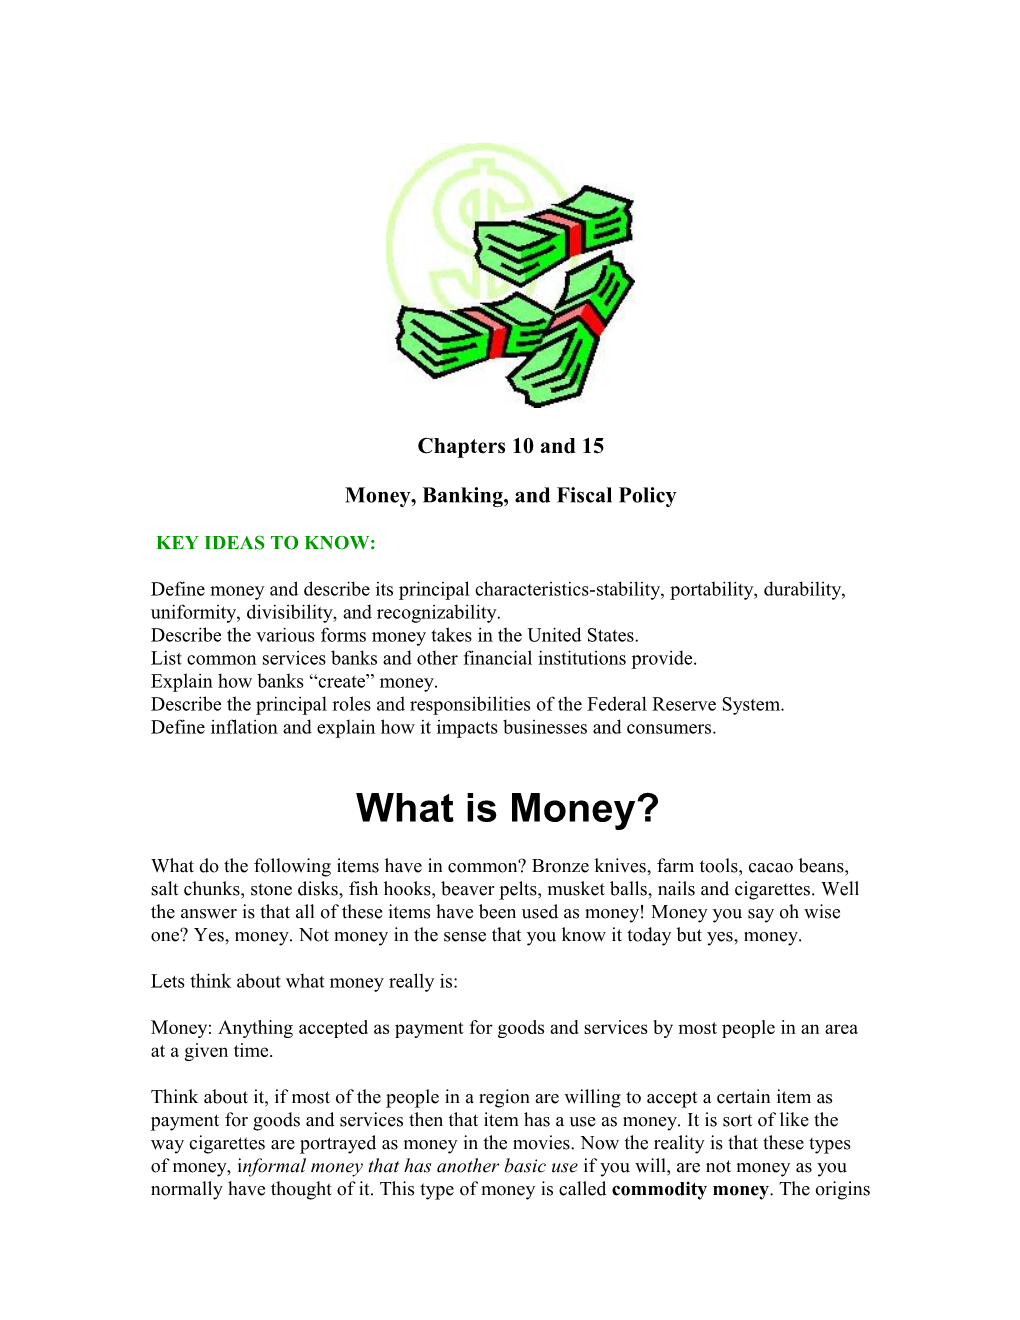 Money, Banking, and Fiscal Policy